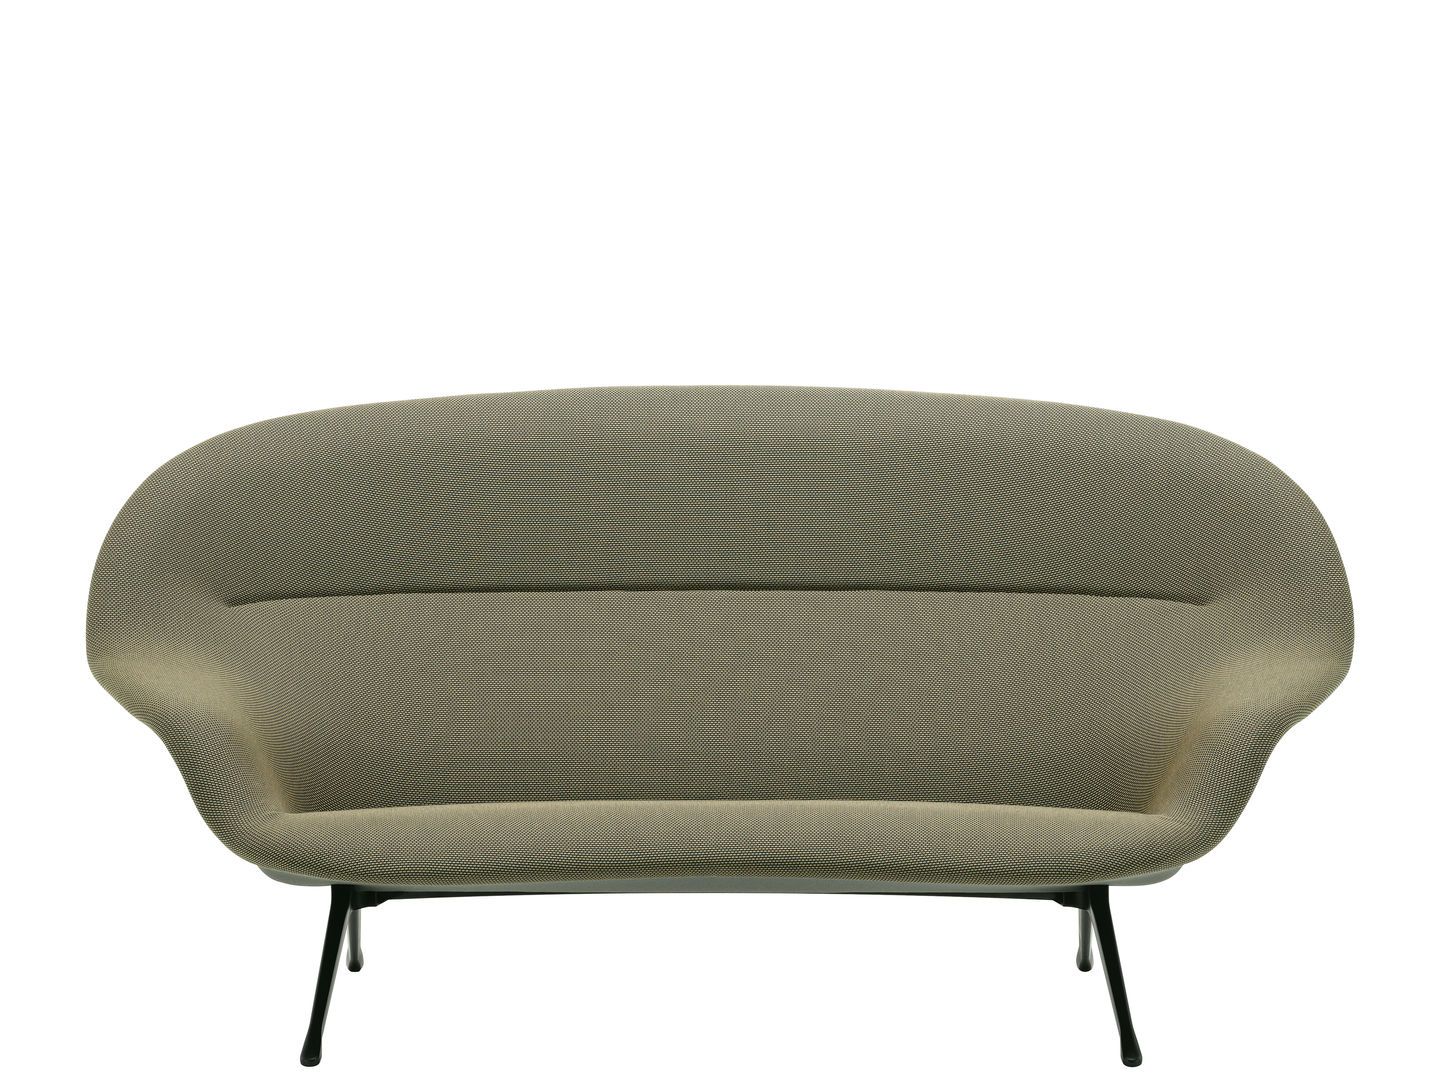 Vitra Abalon Sofa - Modern Design for Home and Office Comfort